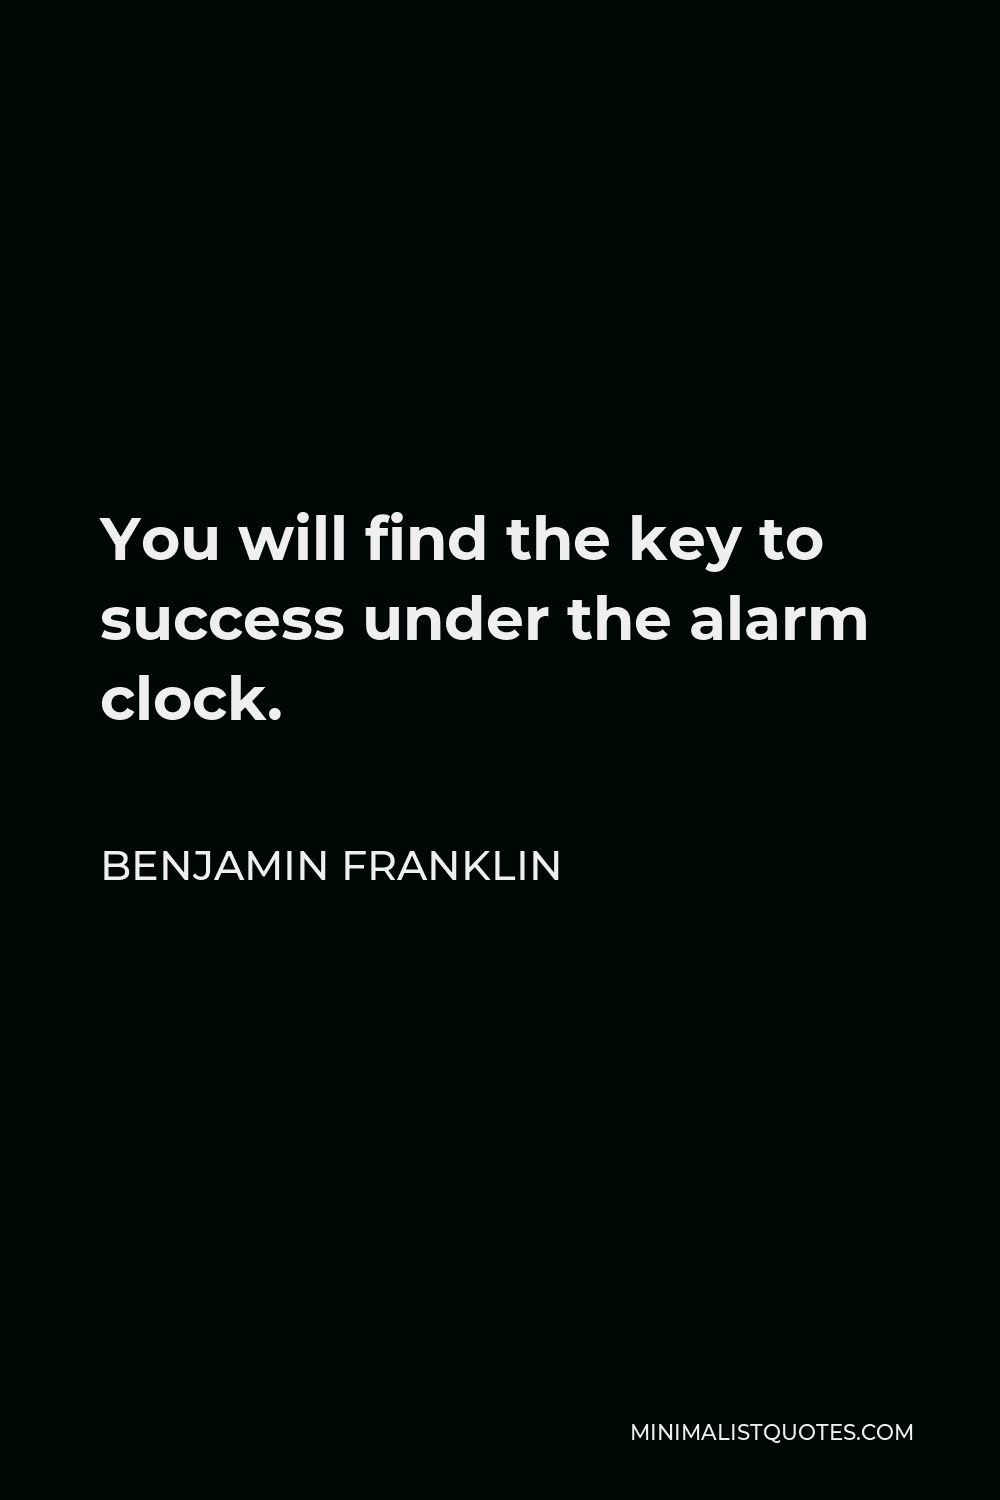 Benjamin Franklin Quote - You will find the key to success under the alarm clock.